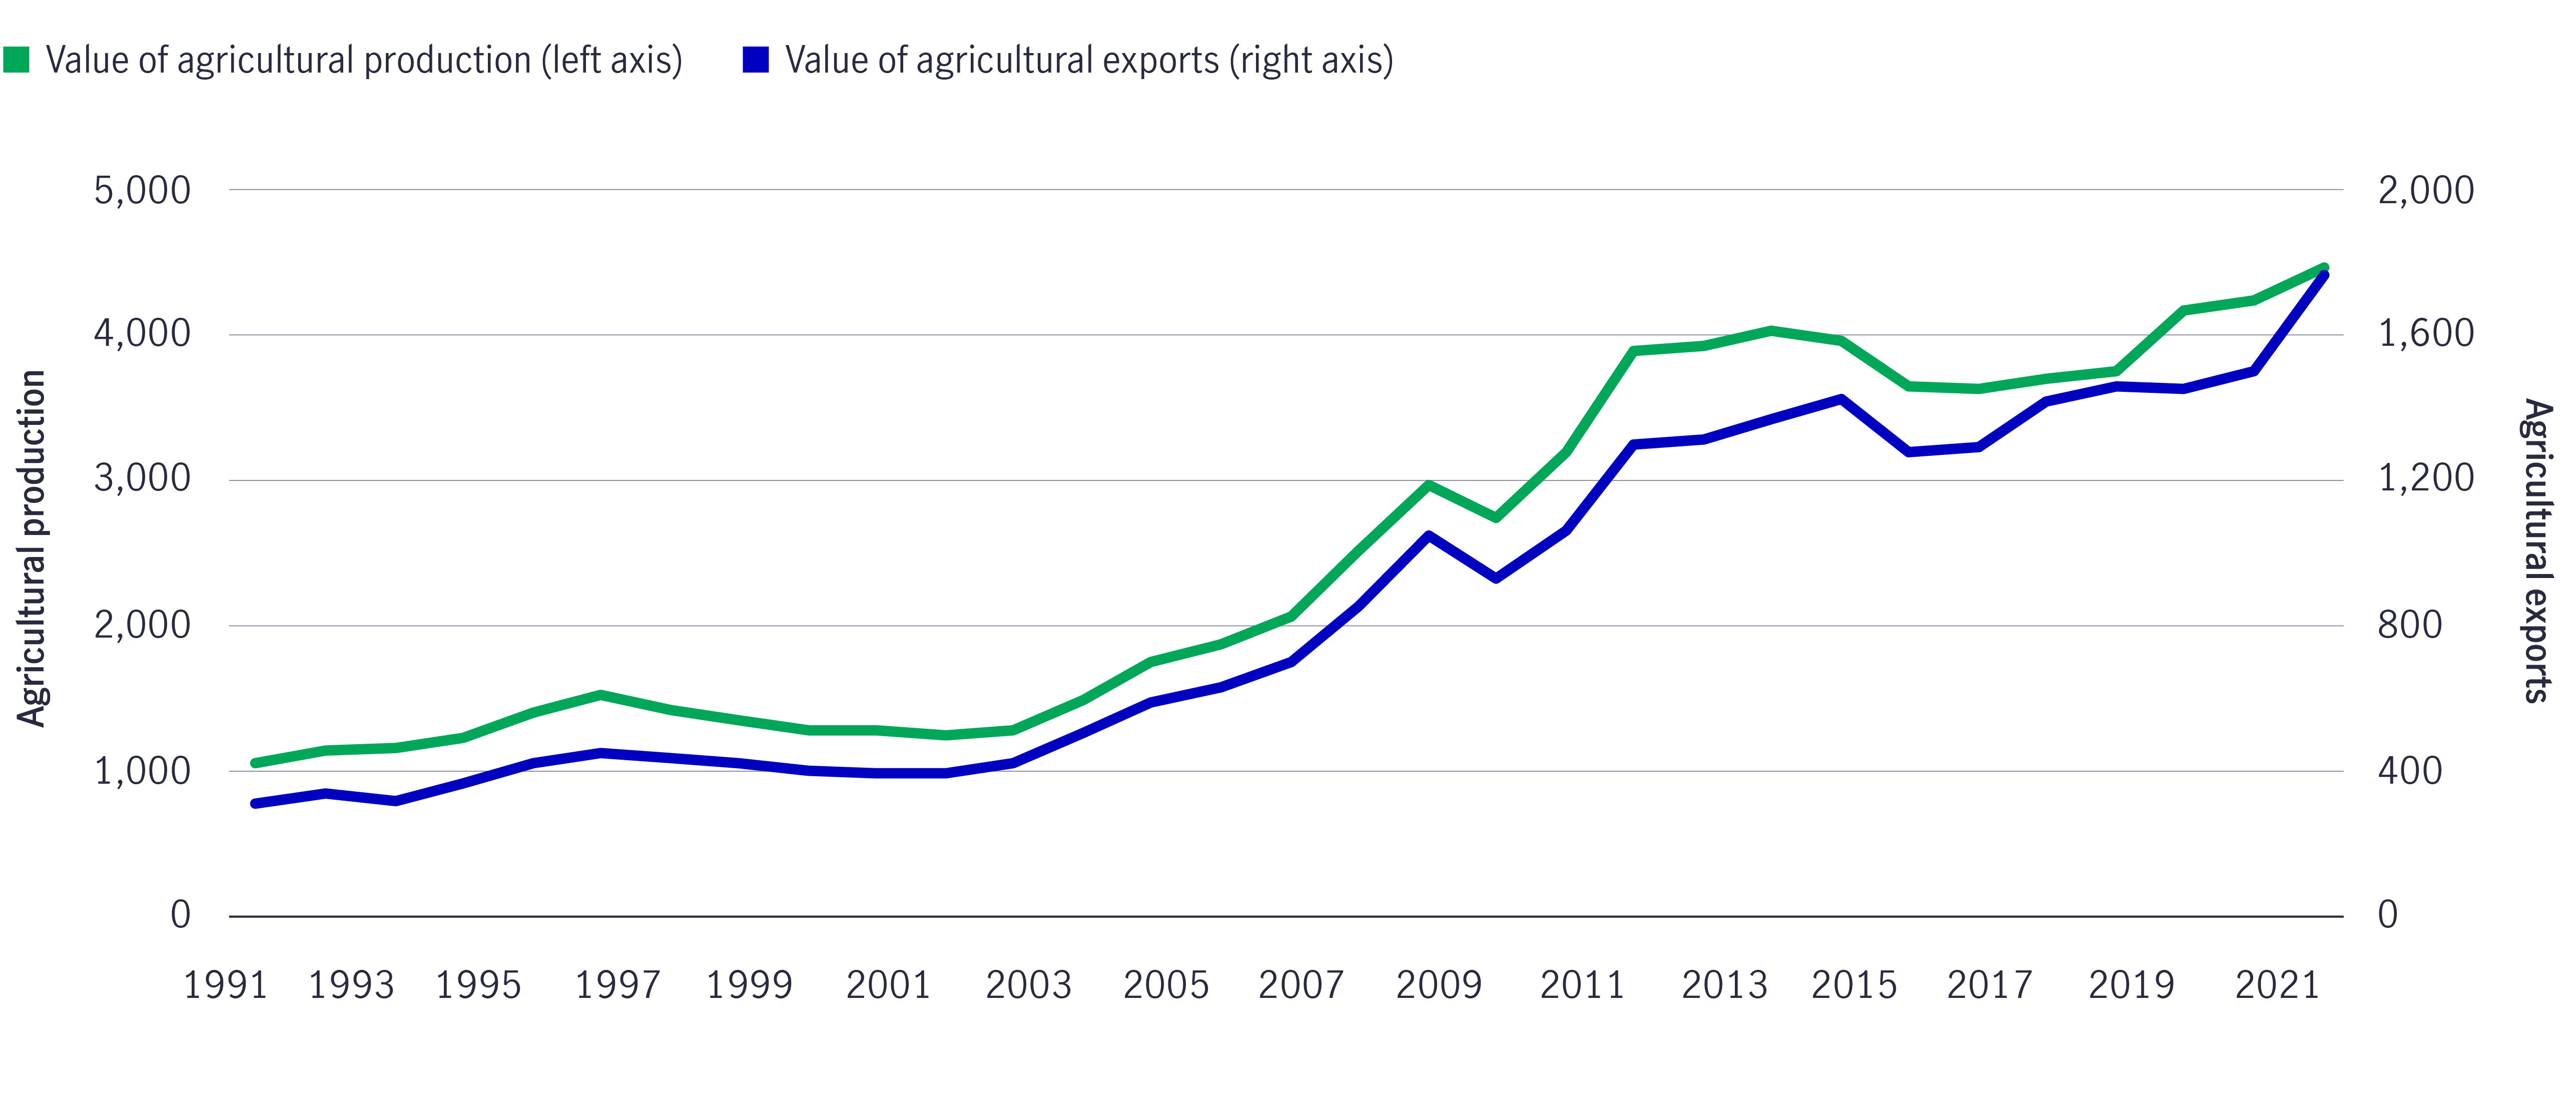 The chart shows steep growth in global total agricultural production and exports between 1991 and 2021, valued in 2021 at over $4 trillion and $1.6 trillion, respectively.